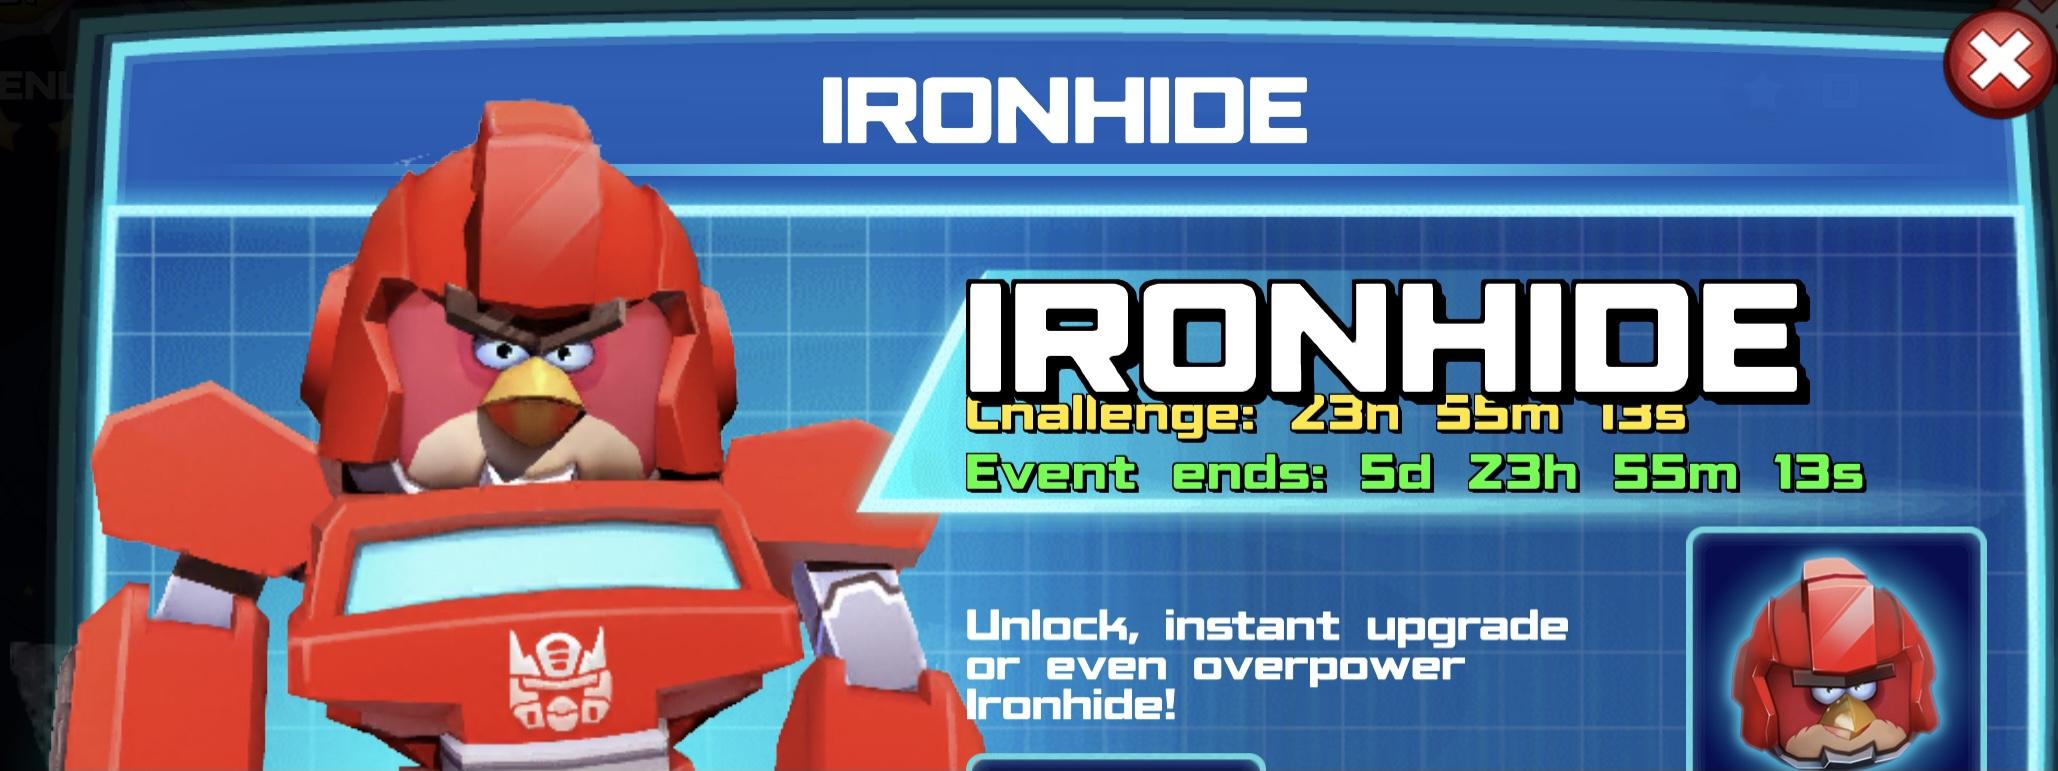 The event banner for Ironhide